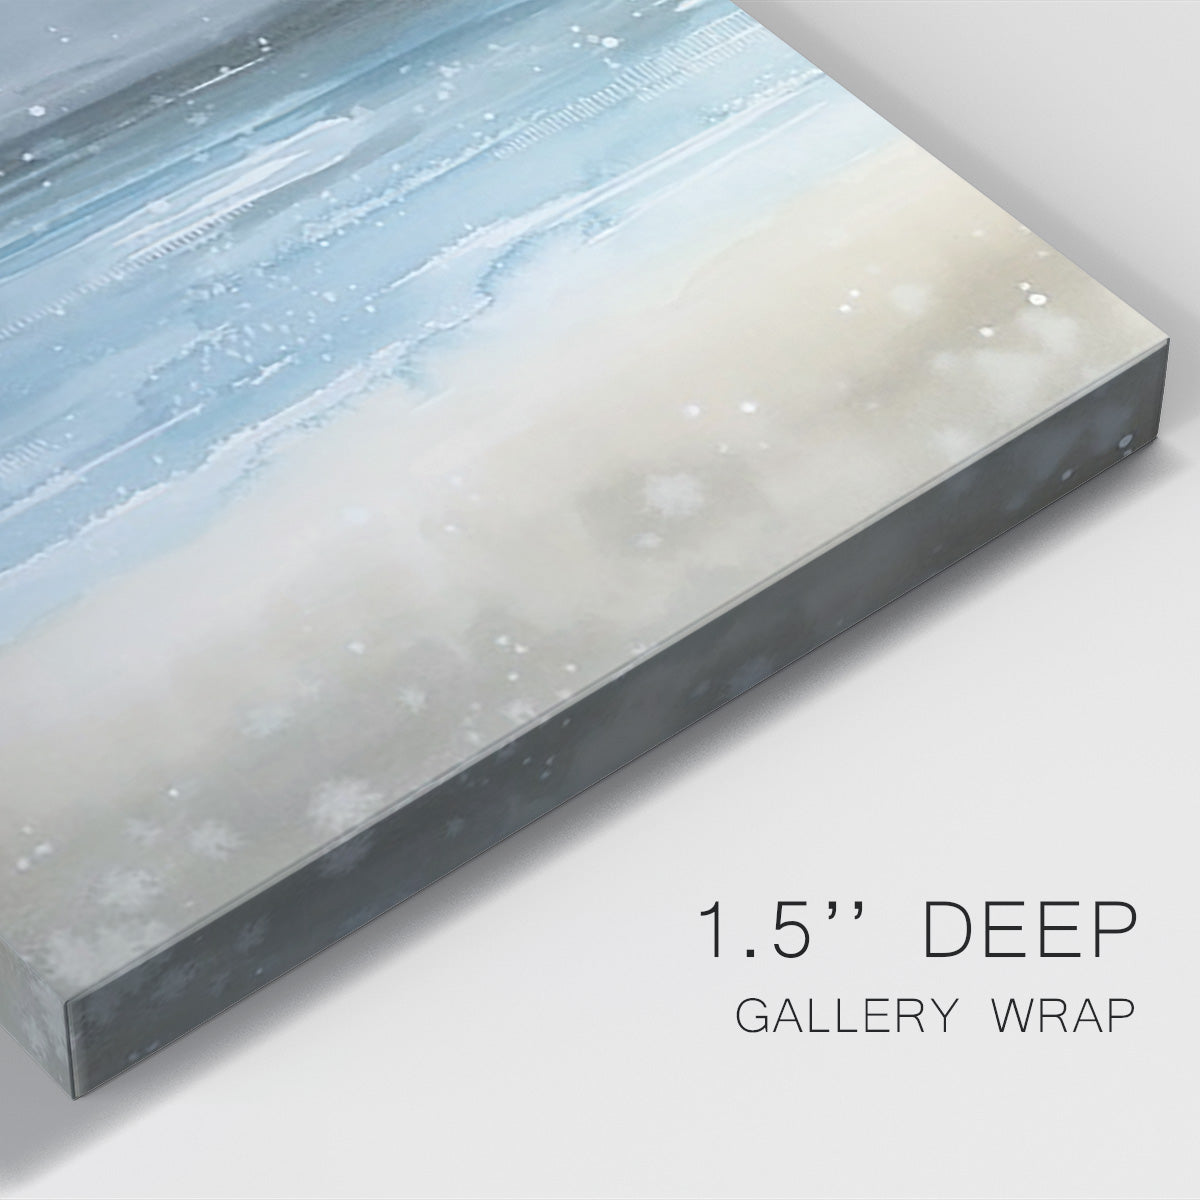 Stars and the Sea I Premium Gallery Wrapped Canvas - Ready to Hang